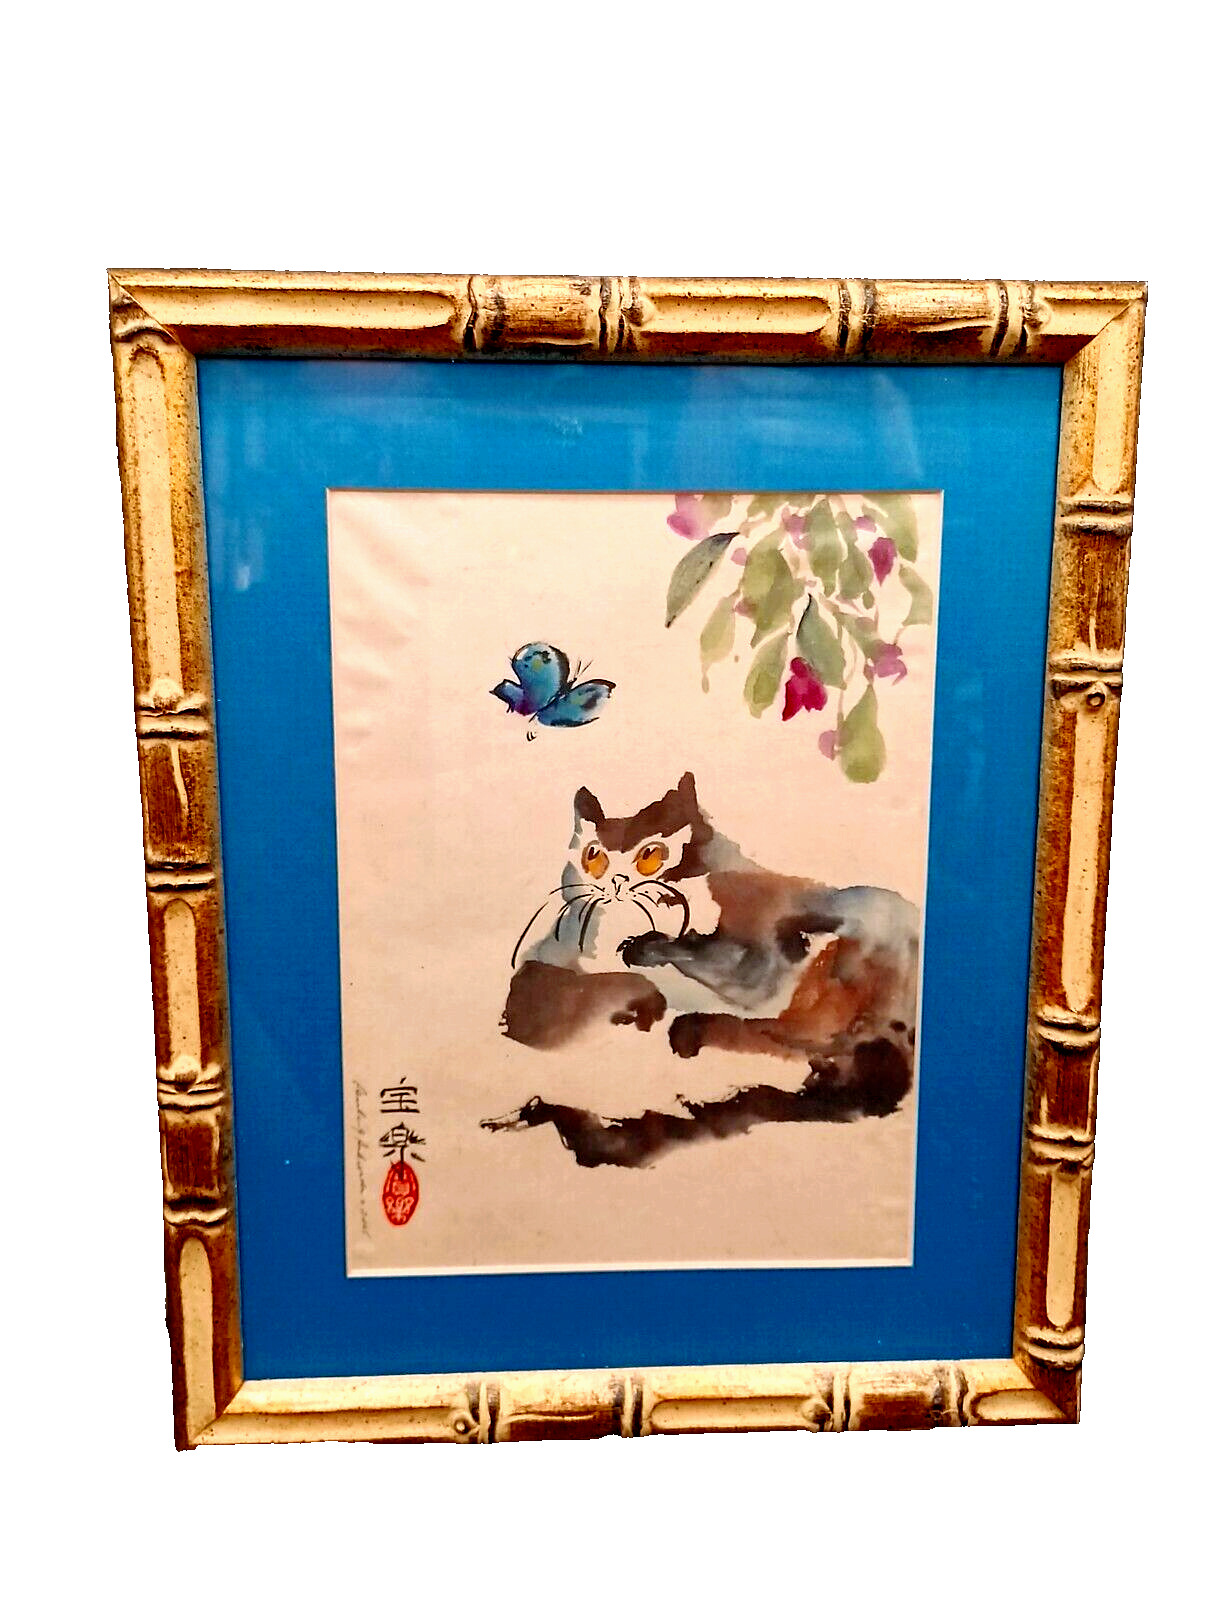 Bamboo Style FRAME GLASS Cat KITTY Butterfly WATERCOLOR ART Japan Artist SIGNED